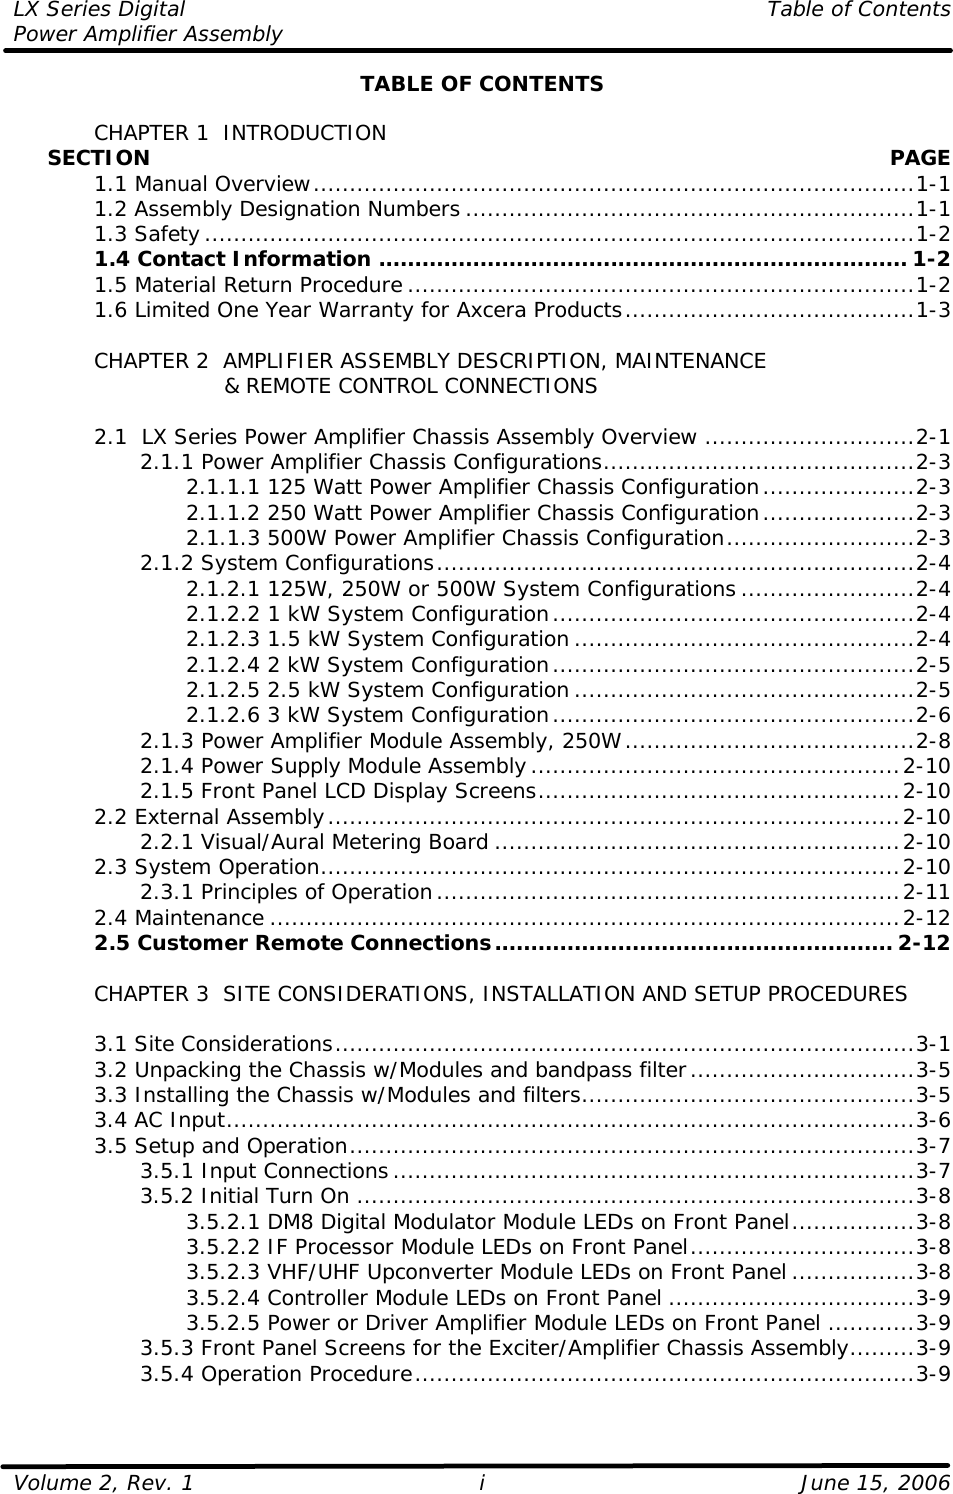 LX Series Digital    Table of Contents Power Amplifier Assembly  Volume 2, Rev. 1    June 15, 2006 i TABLE OF CONTENTS   CHAPTER 1  INTRODUCTION      SECTION    PAGE  1.1 Manual Overview...................................................................................1-1  1.2 Assembly Designation Numbers ..............................................................1-1  1.3 Safety..................................................................................................1-2  1.4 Contact Information ......................................................................... 1-2  1.5 Material Return Procedure ......................................................................1-2  1.6 Limited One Year Warranty for Axcera Products........................................1-3   CHAPTER 2  AMPLIFIER ASSEMBLY DESCRIPTION, MAINTENANCE                 &amp; REMOTE CONTROL CONNECTIONS   2.1  LX Series Power Amplifier Chassis Assembly Overview .............................2-1     2.1.1 Power Amplifier Chassis Configurations...........................................2-3     2.1.1.1 125 Watt Power Amplifier Chassis Configuration.....................2-3     2.1.1.2 250 Watt Power Amplifier Chassis Configuration.....................2-3     2.1.1.3 500W Power Amplifier Chassis Configuration..........................2-3     2.1.2 System Configurations..................................................................2-4     2.1.2.1 125W, 250W or 500W System Configurations ........................2-4     2.1.2.2 1 kW System Configuration..................................................2-4     2.1.2.3 1.5 kW System Configuration ...............................................2-4     2.1.2.4 2 kW System Configuration..................................................2-5     2.1.2.5 2.5 kW System Configuration ...............................................2-5     2.1.2.6 3 kW System Configuration..................................................2-6     2.1.3 Power Amplifier Module Assembly, 250W........................................2-8     2.1.4 Power Supply Module Assembly...................................................2-10     2.1.5 Front Panel LCD Display Screens..................................................2-10  2.2 External Assembly...............................................................................2-10     2.2.1 Visual/Aural Metering Board ........................................................2-10  2.3 System Operation................................................................................2-10     2.3.1 Principles of Operation................................................................2-11  2.4 Maintenance .......................................................................................2-12  2.5 Customer Remote Connections....................................................... 2-12       CHAPTER 3  SITE CONSIDERATIONS, INSTALLATION AND SETUP PROCEDURES     3.1 Site Considerations................................................................................3-1  3.2 Unpacking the Chassis w/Modules and bandpass filter...............................3-5  3.3 Installing the Chassis w/Modules and filters..............................................3-5  3.4 AC Input...............................................................................................3-6  3.5 Setup and Operation..............................................................................3-7     3.5.1 Input Connections........................................................................3-7     3.5.2 Initial Turn On .............................................................................3-8     3.5.2.1 DM8 Digital Modulator Module LEDs on Front Panel.................3-8     3.5.2.2 IF Processor Module LEDs on Front Panel...............................3-8     3.5.2.3 VHF/UHF Upconverter Module LEDs on Front Panel .................3-8     3.5.2.4 Controller Module LEDs on Front Panel ..................................3-9     3.5.2.5 Power or Driver Amplifier Module LEDs on Front Panel ............3-9     3.5.3 Front Panel Screens for the Exciter/Amplifier Chassis Assembly.........3-9     3.5.4 Operation Procedure.....................................................................3-9 